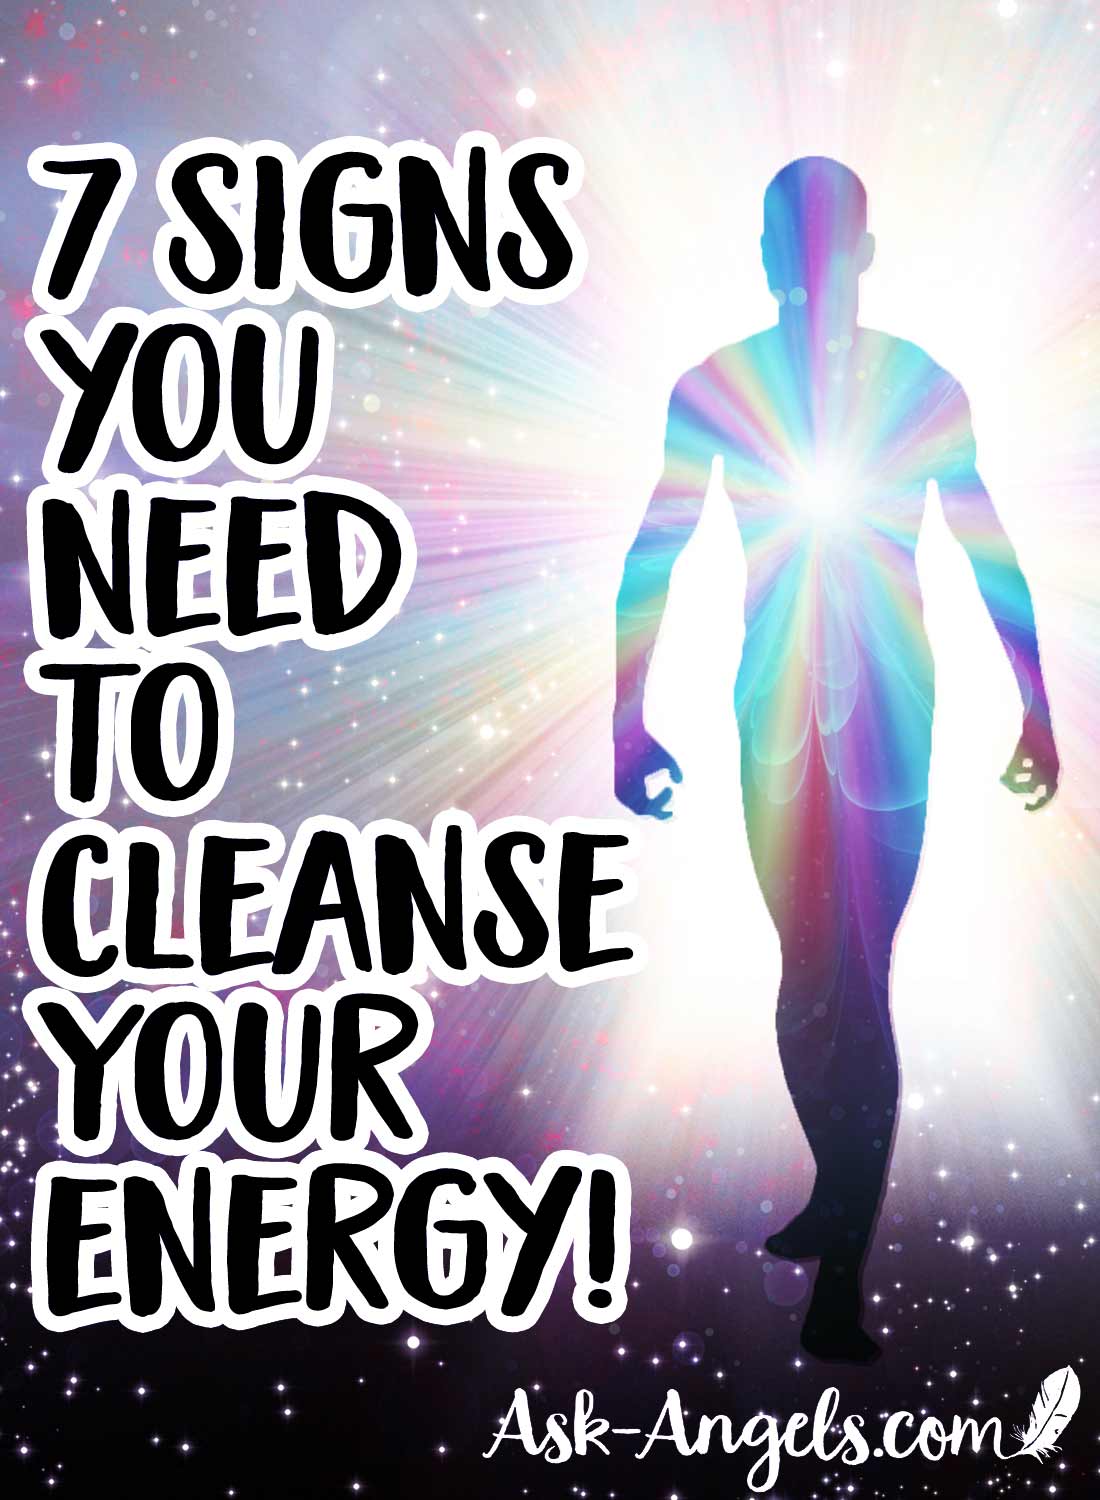 7 Signs You Need to Cleanse Your Energy